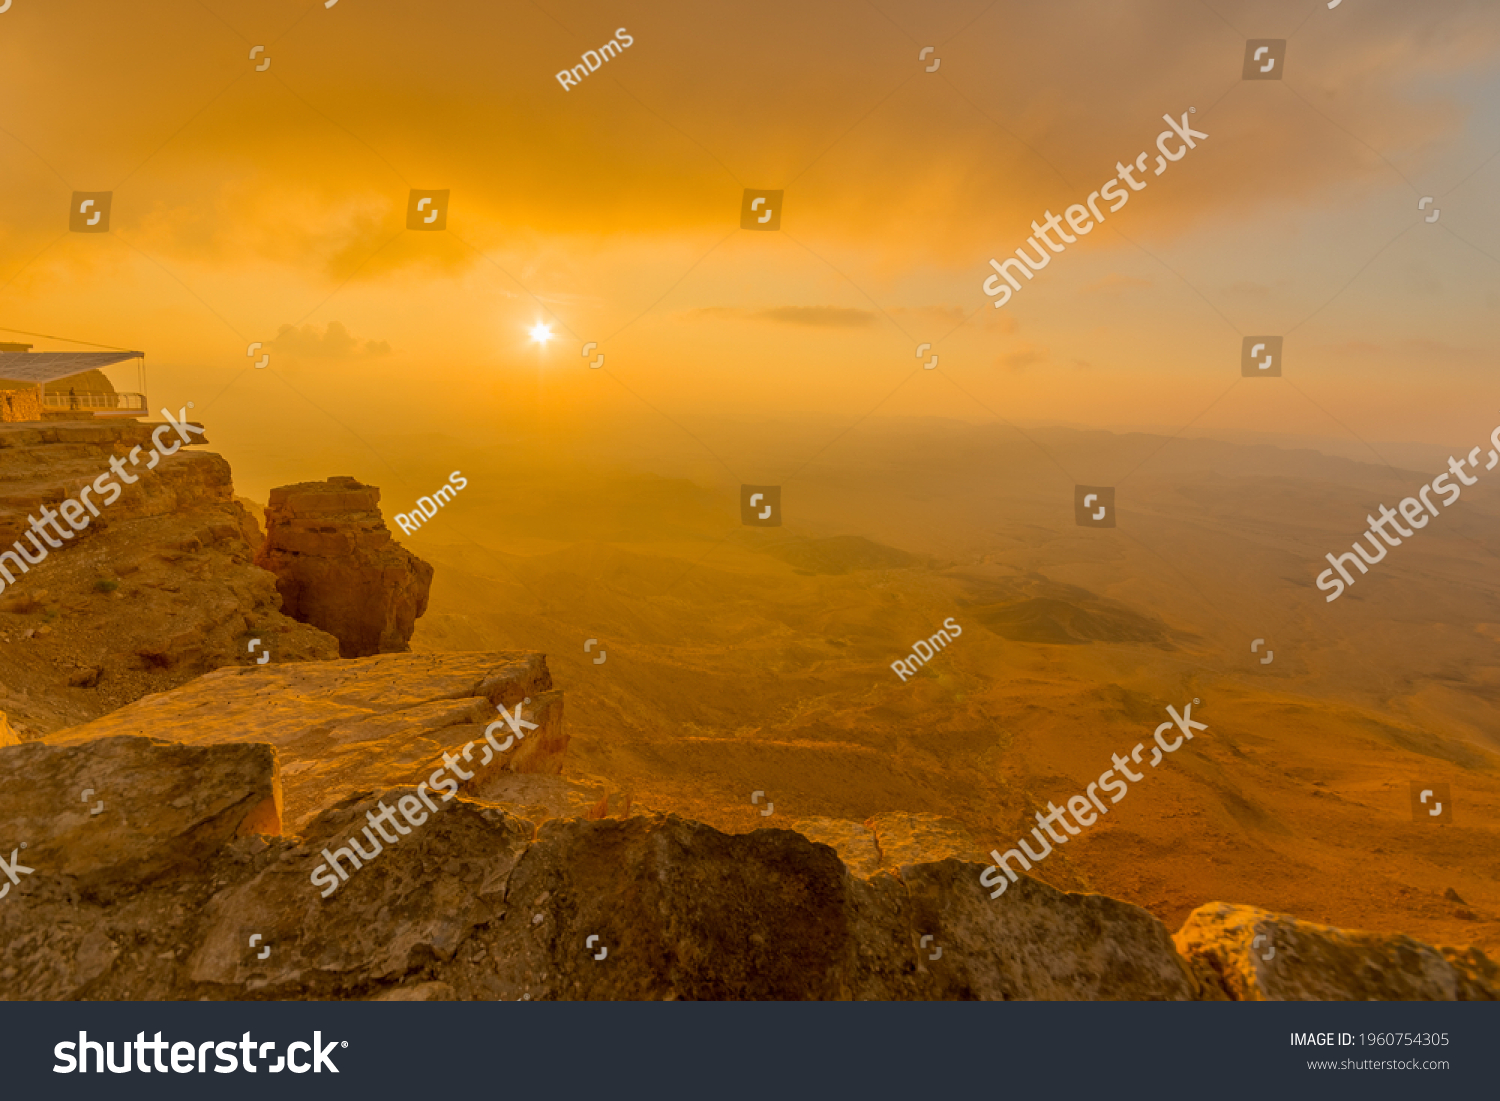 Sunrise view of cliffs and landscape in Makhtesh (crater) Ramon, the Negev Desert, Southern Israel #1960754305